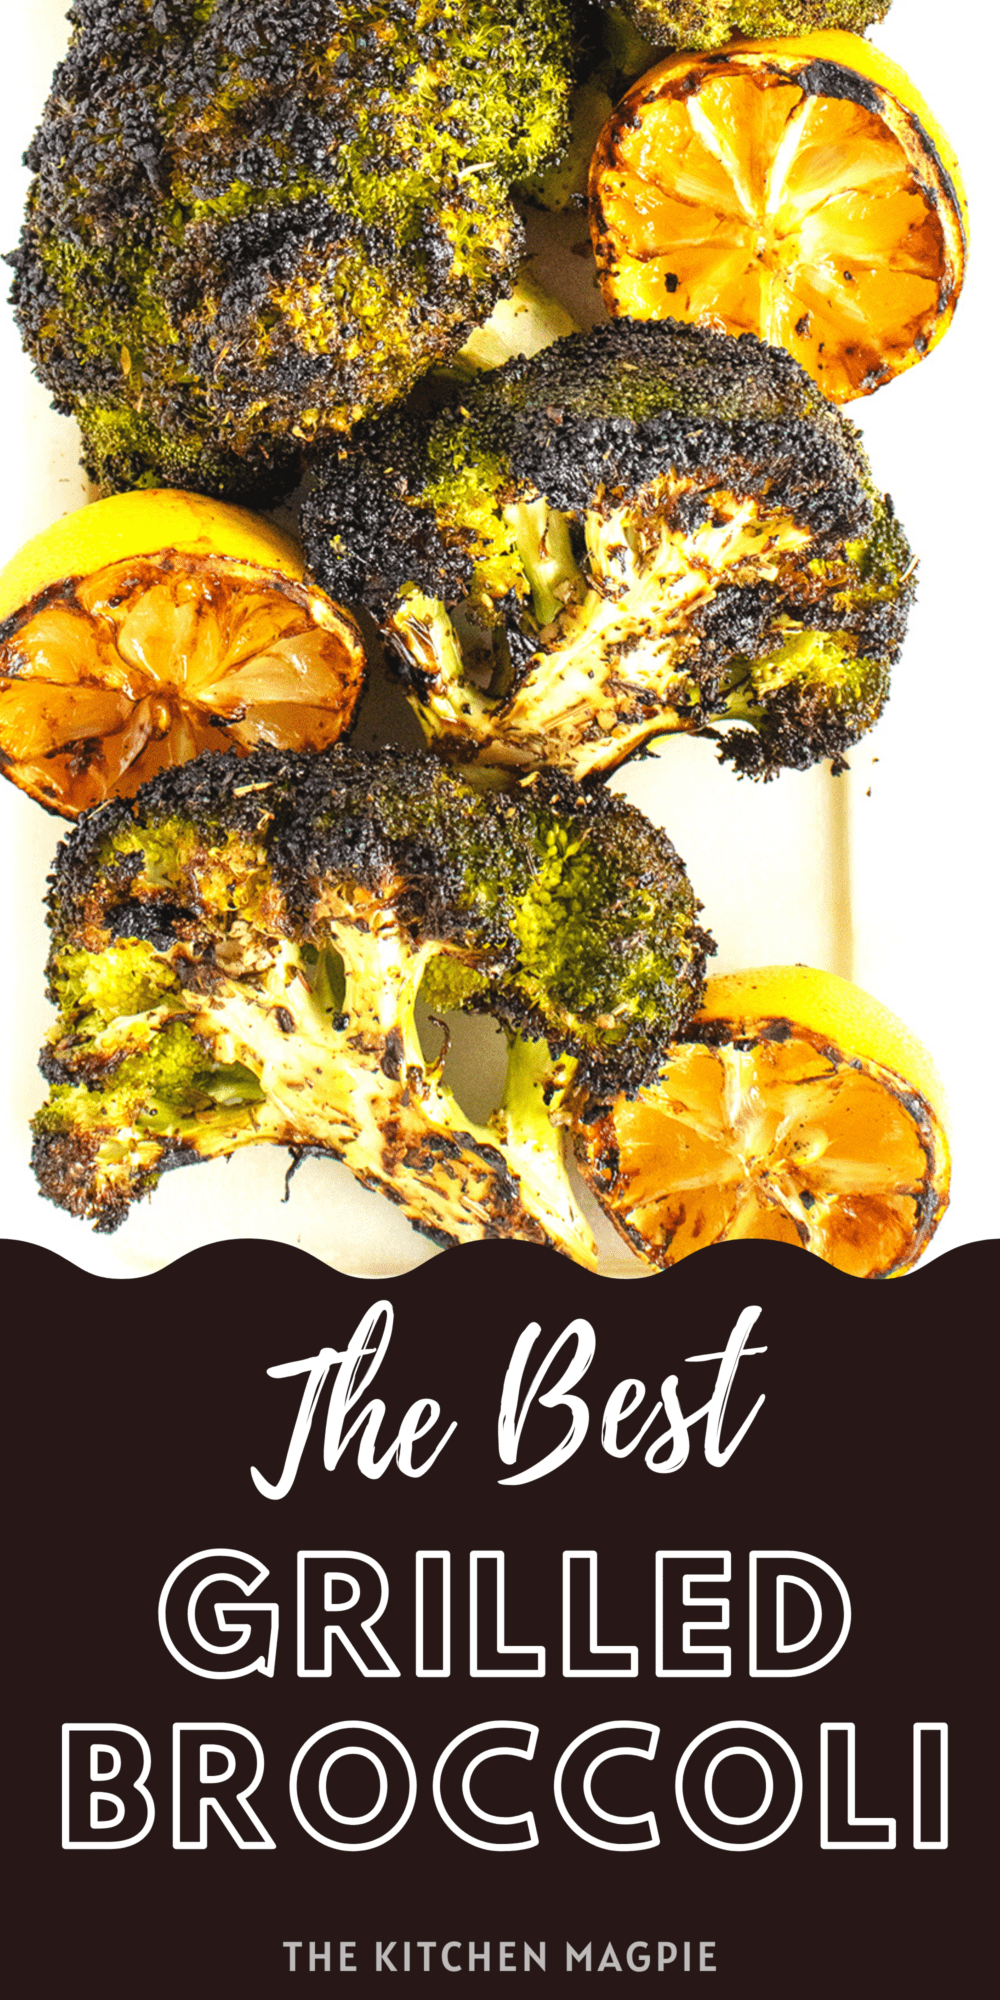 Tender broccoli grilled to perfection  with a light marinade giving it a great flavor!